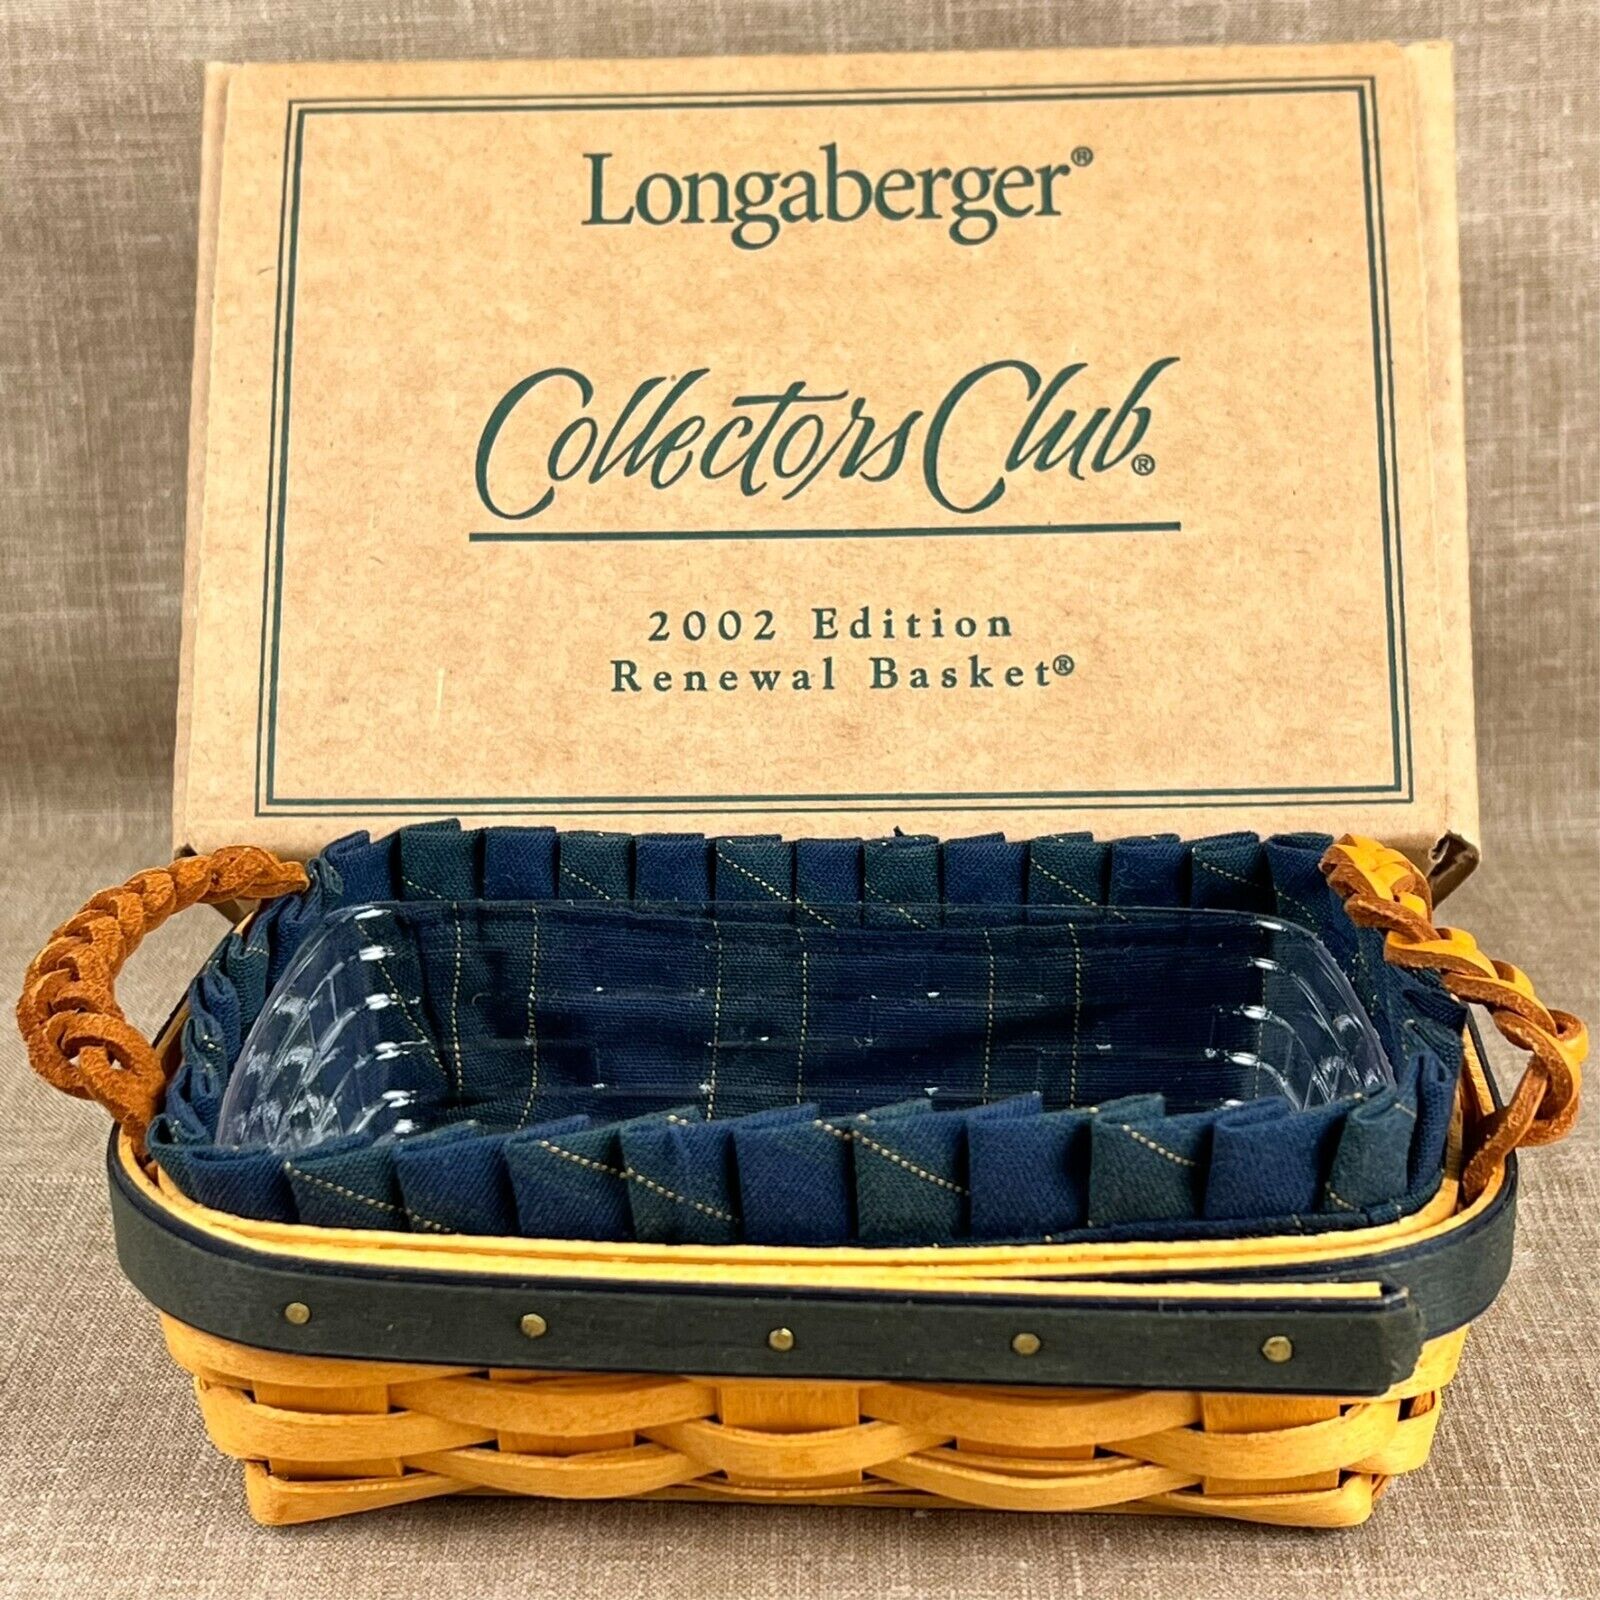 Longaberger 2002 Collectors Club Renewal Basket with Liner and Plastic Protector